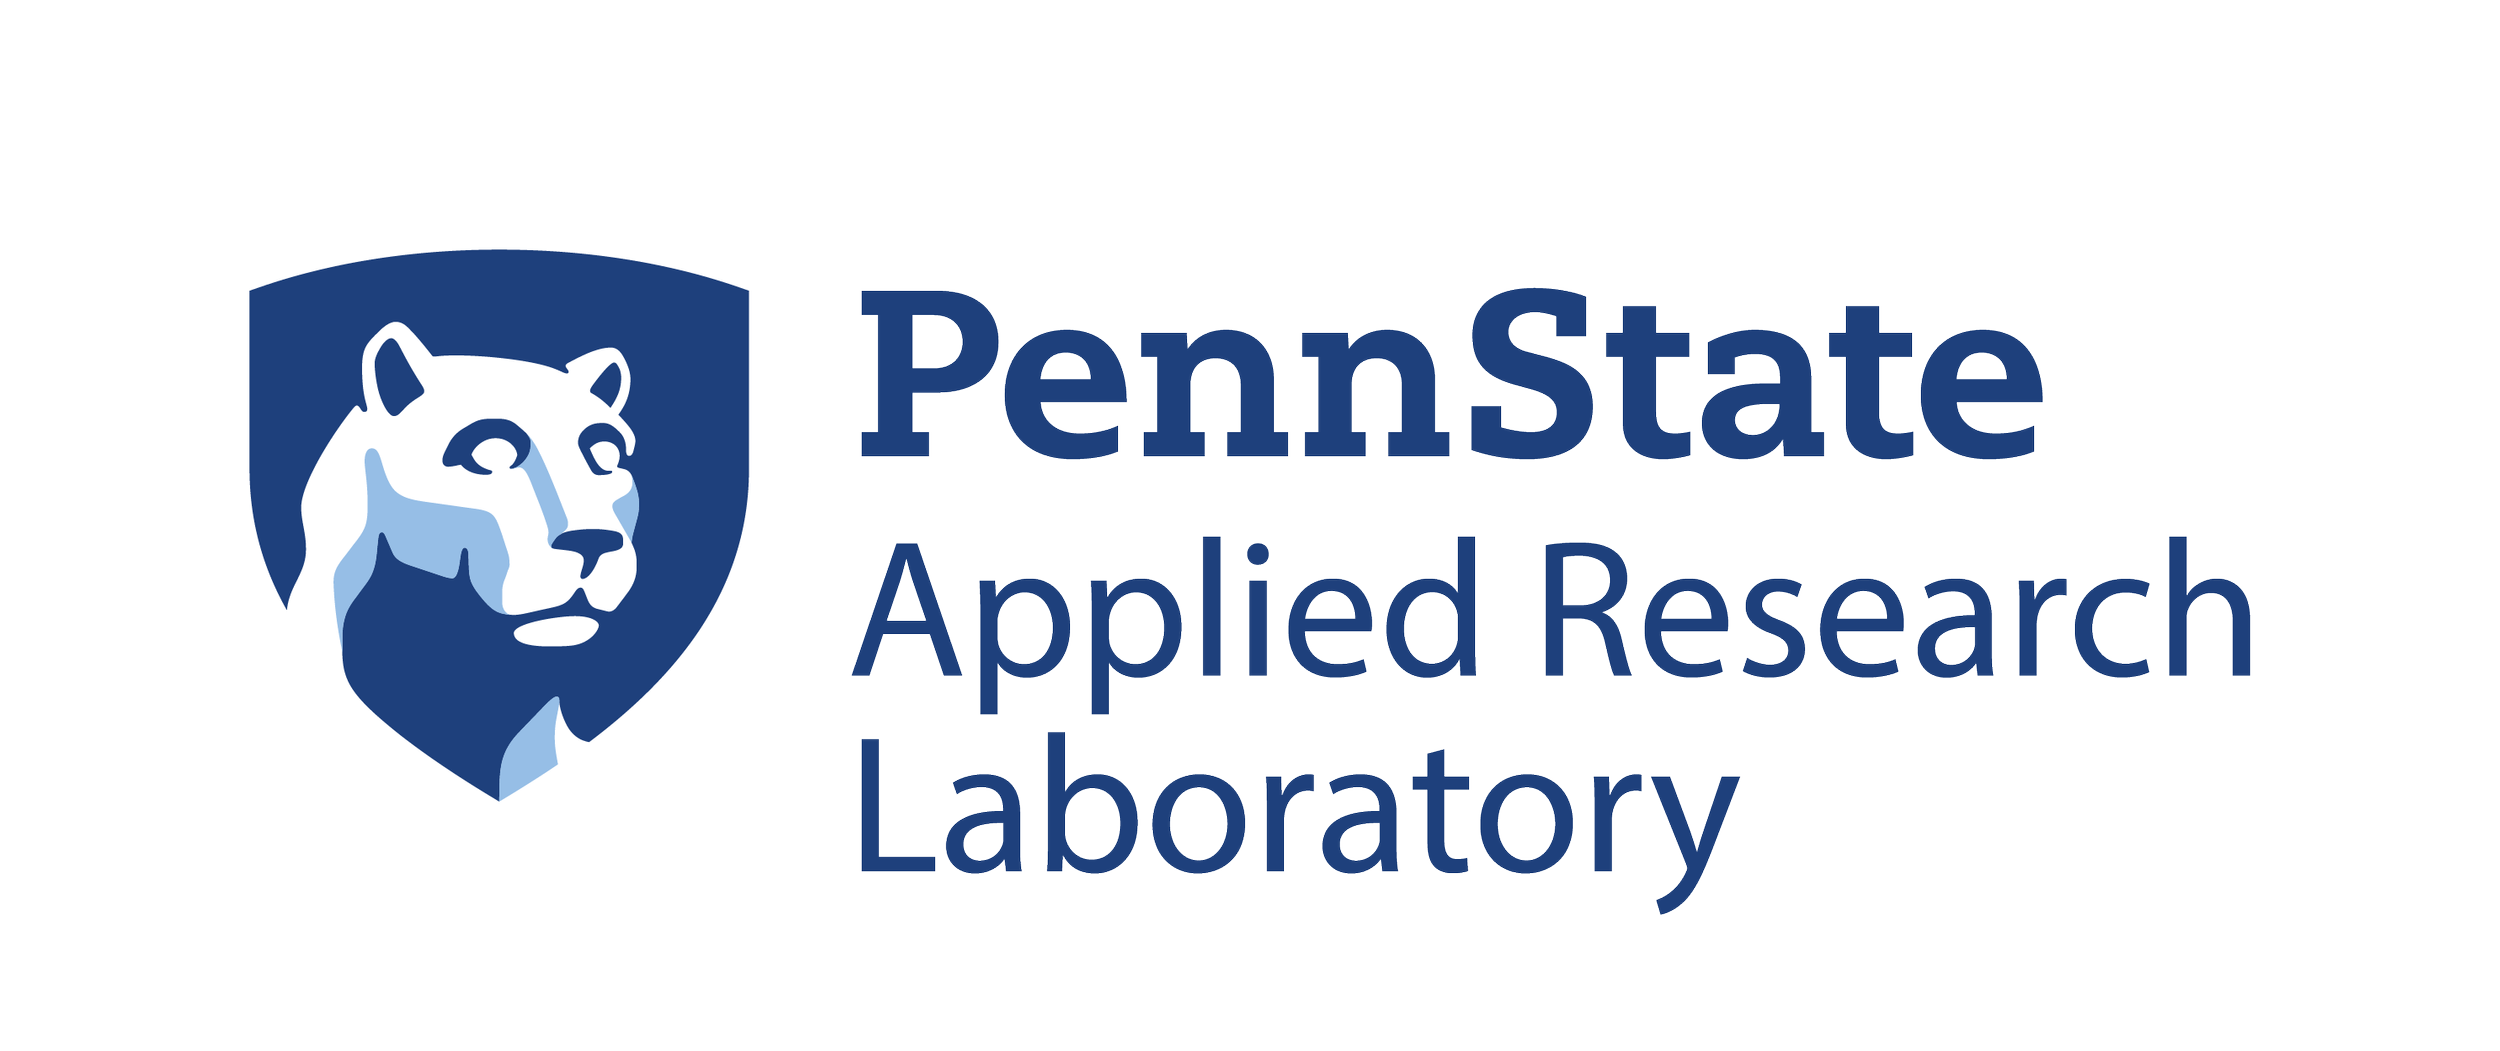 Applied Research Laboratory at Penn State University II.png